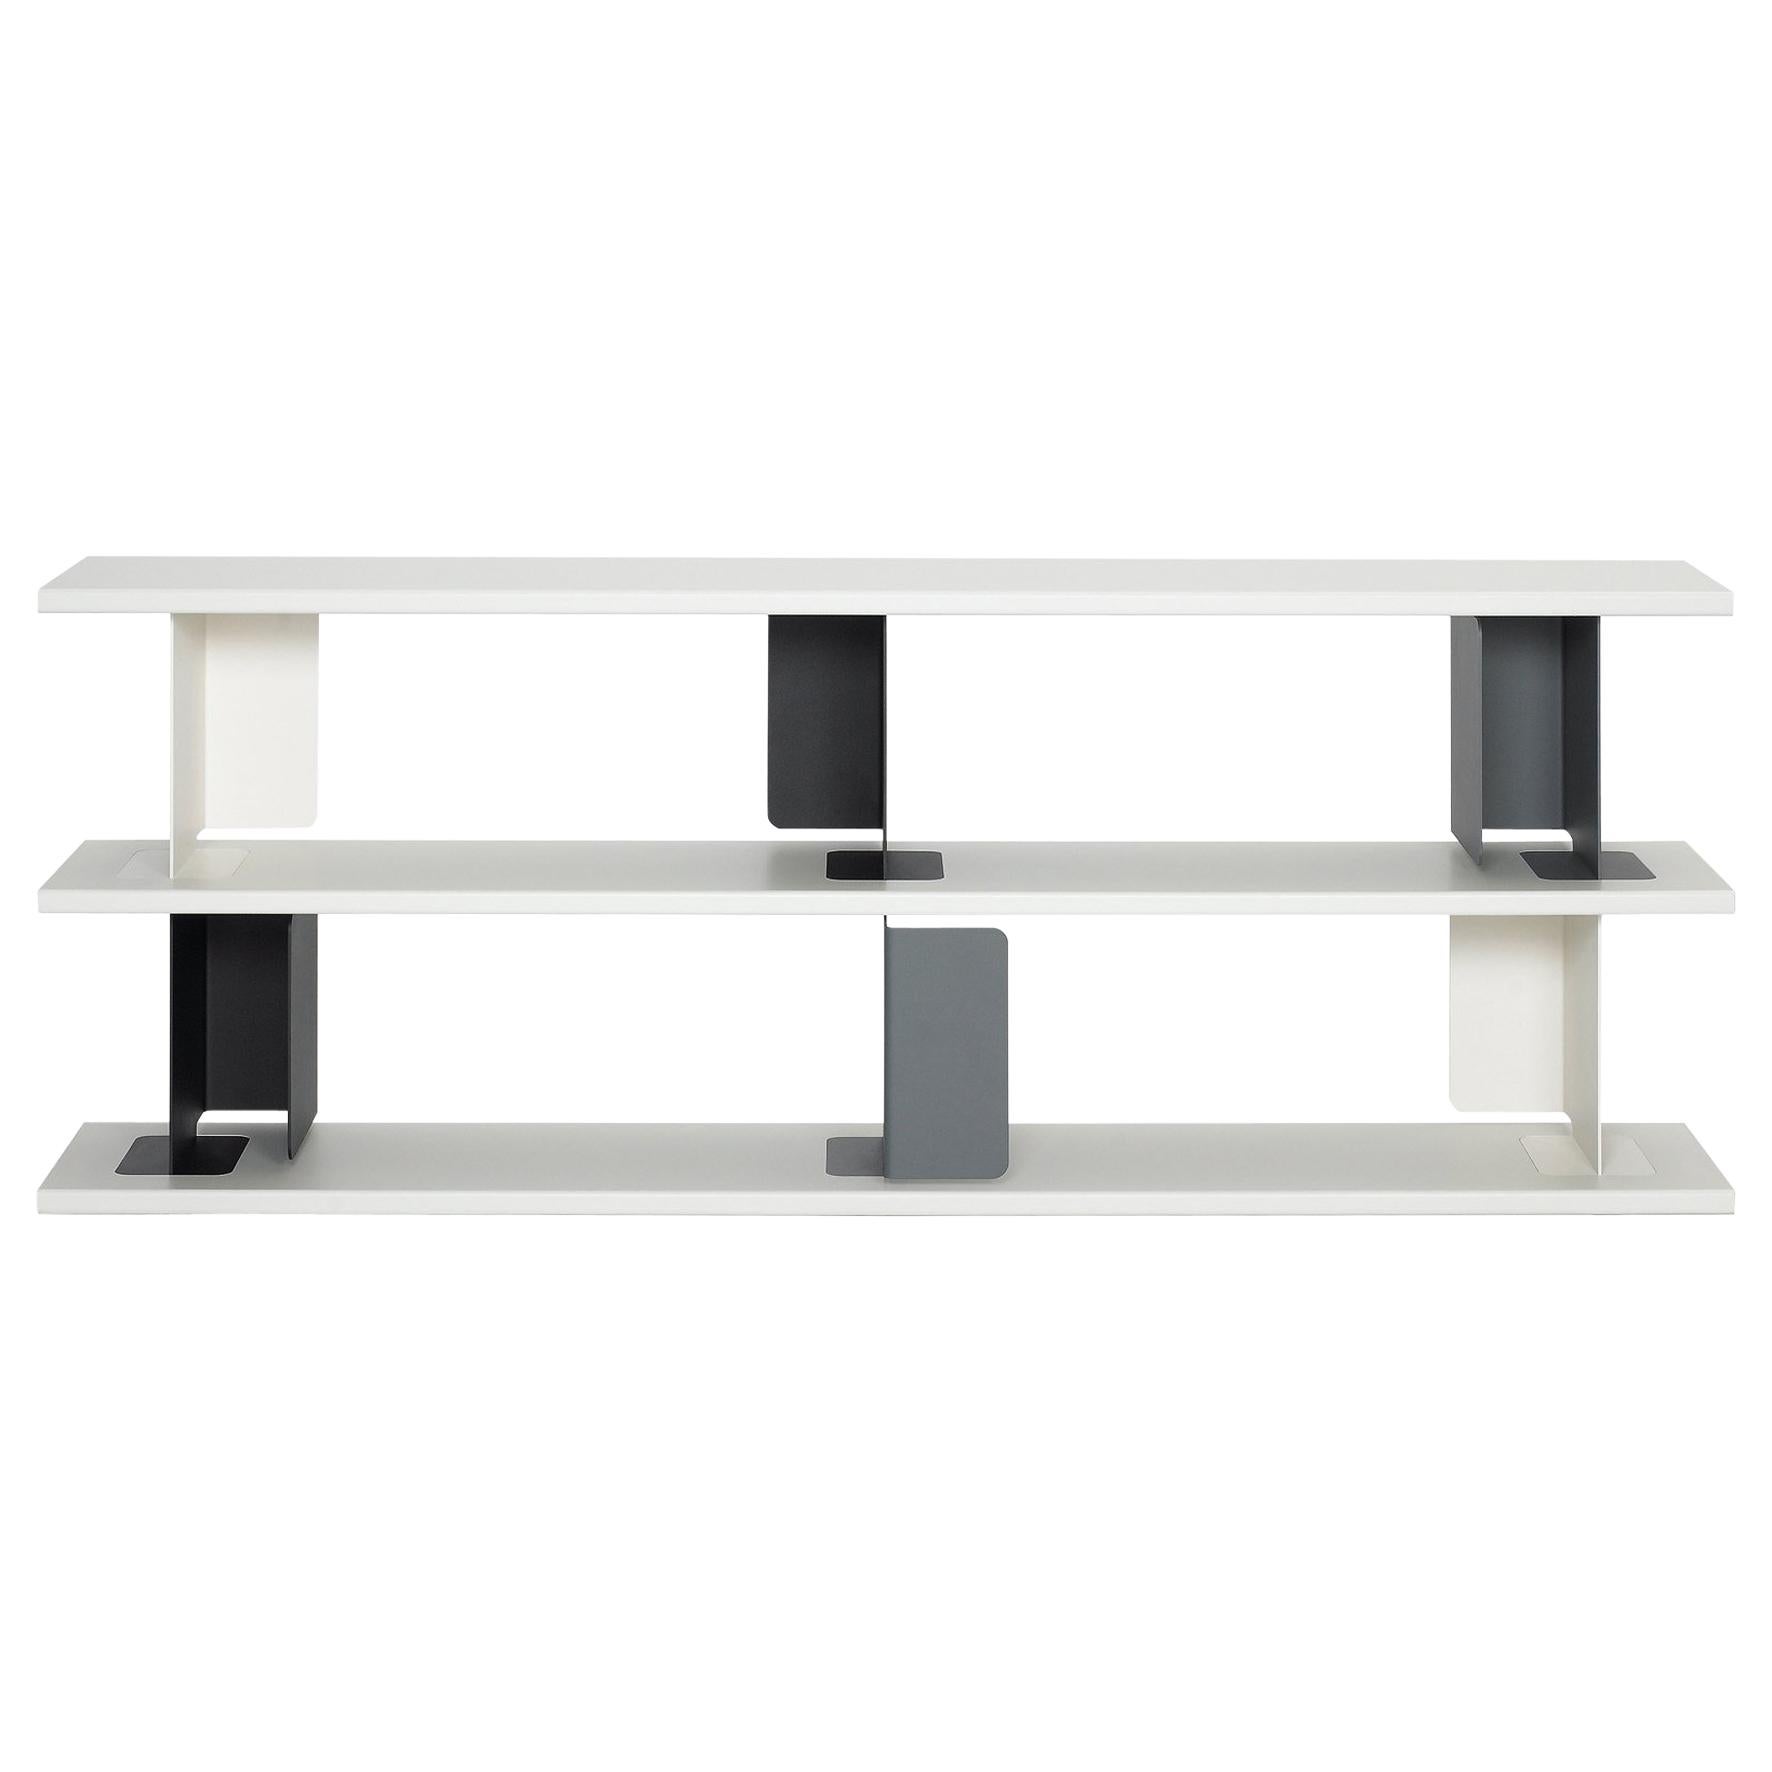 ClassiCon Paris 3 Shelves in White and Grey by E. Barber & J. Osgerby For Sale